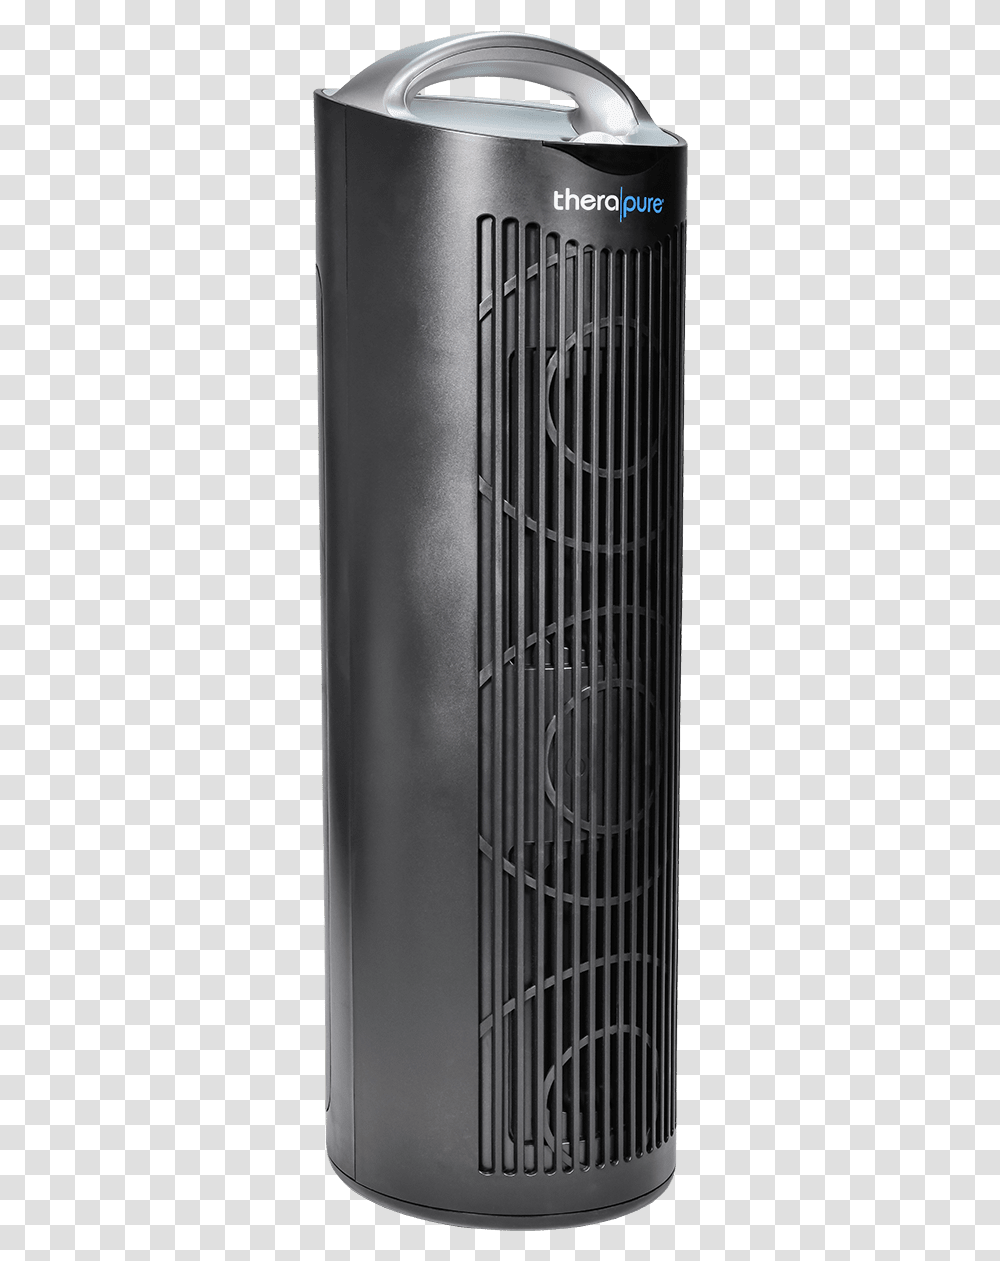 Envion Therapure 4 Stage Uv C Energy Star Air Purifier Air Conditioning, Prison, Electronics, Screen, Heater Transparent Png